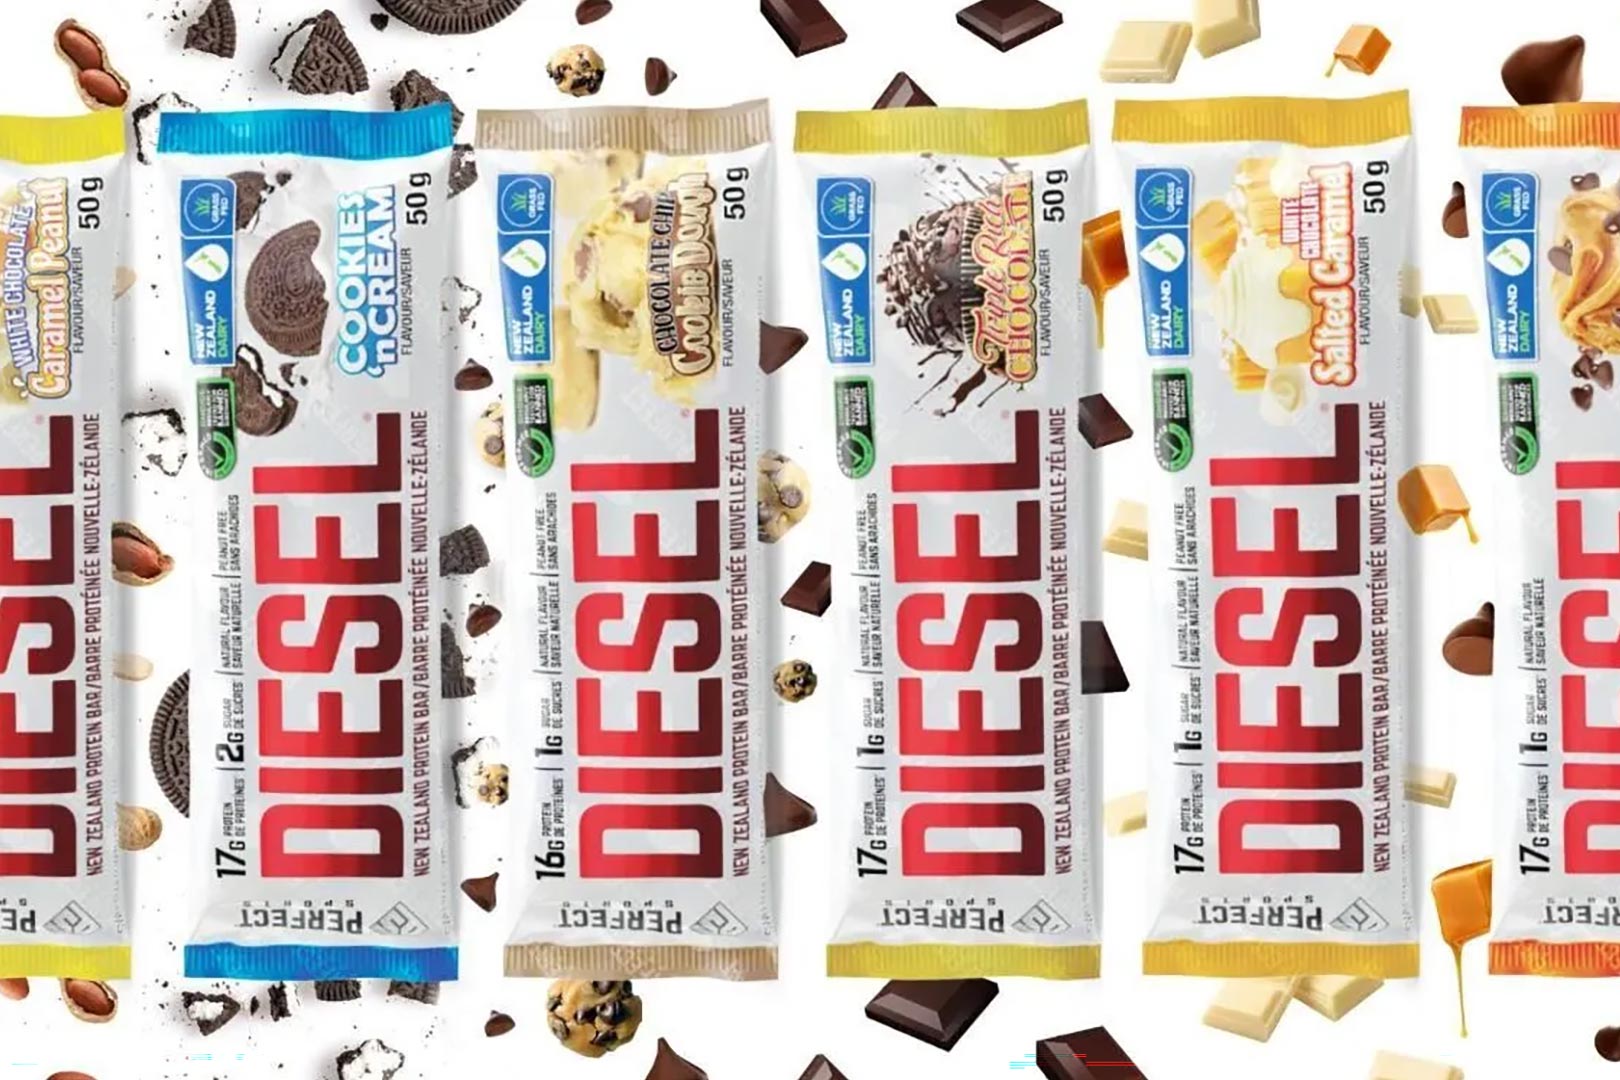 Perfect Sports announces a Diesel Protein Bar in six tasty flavors